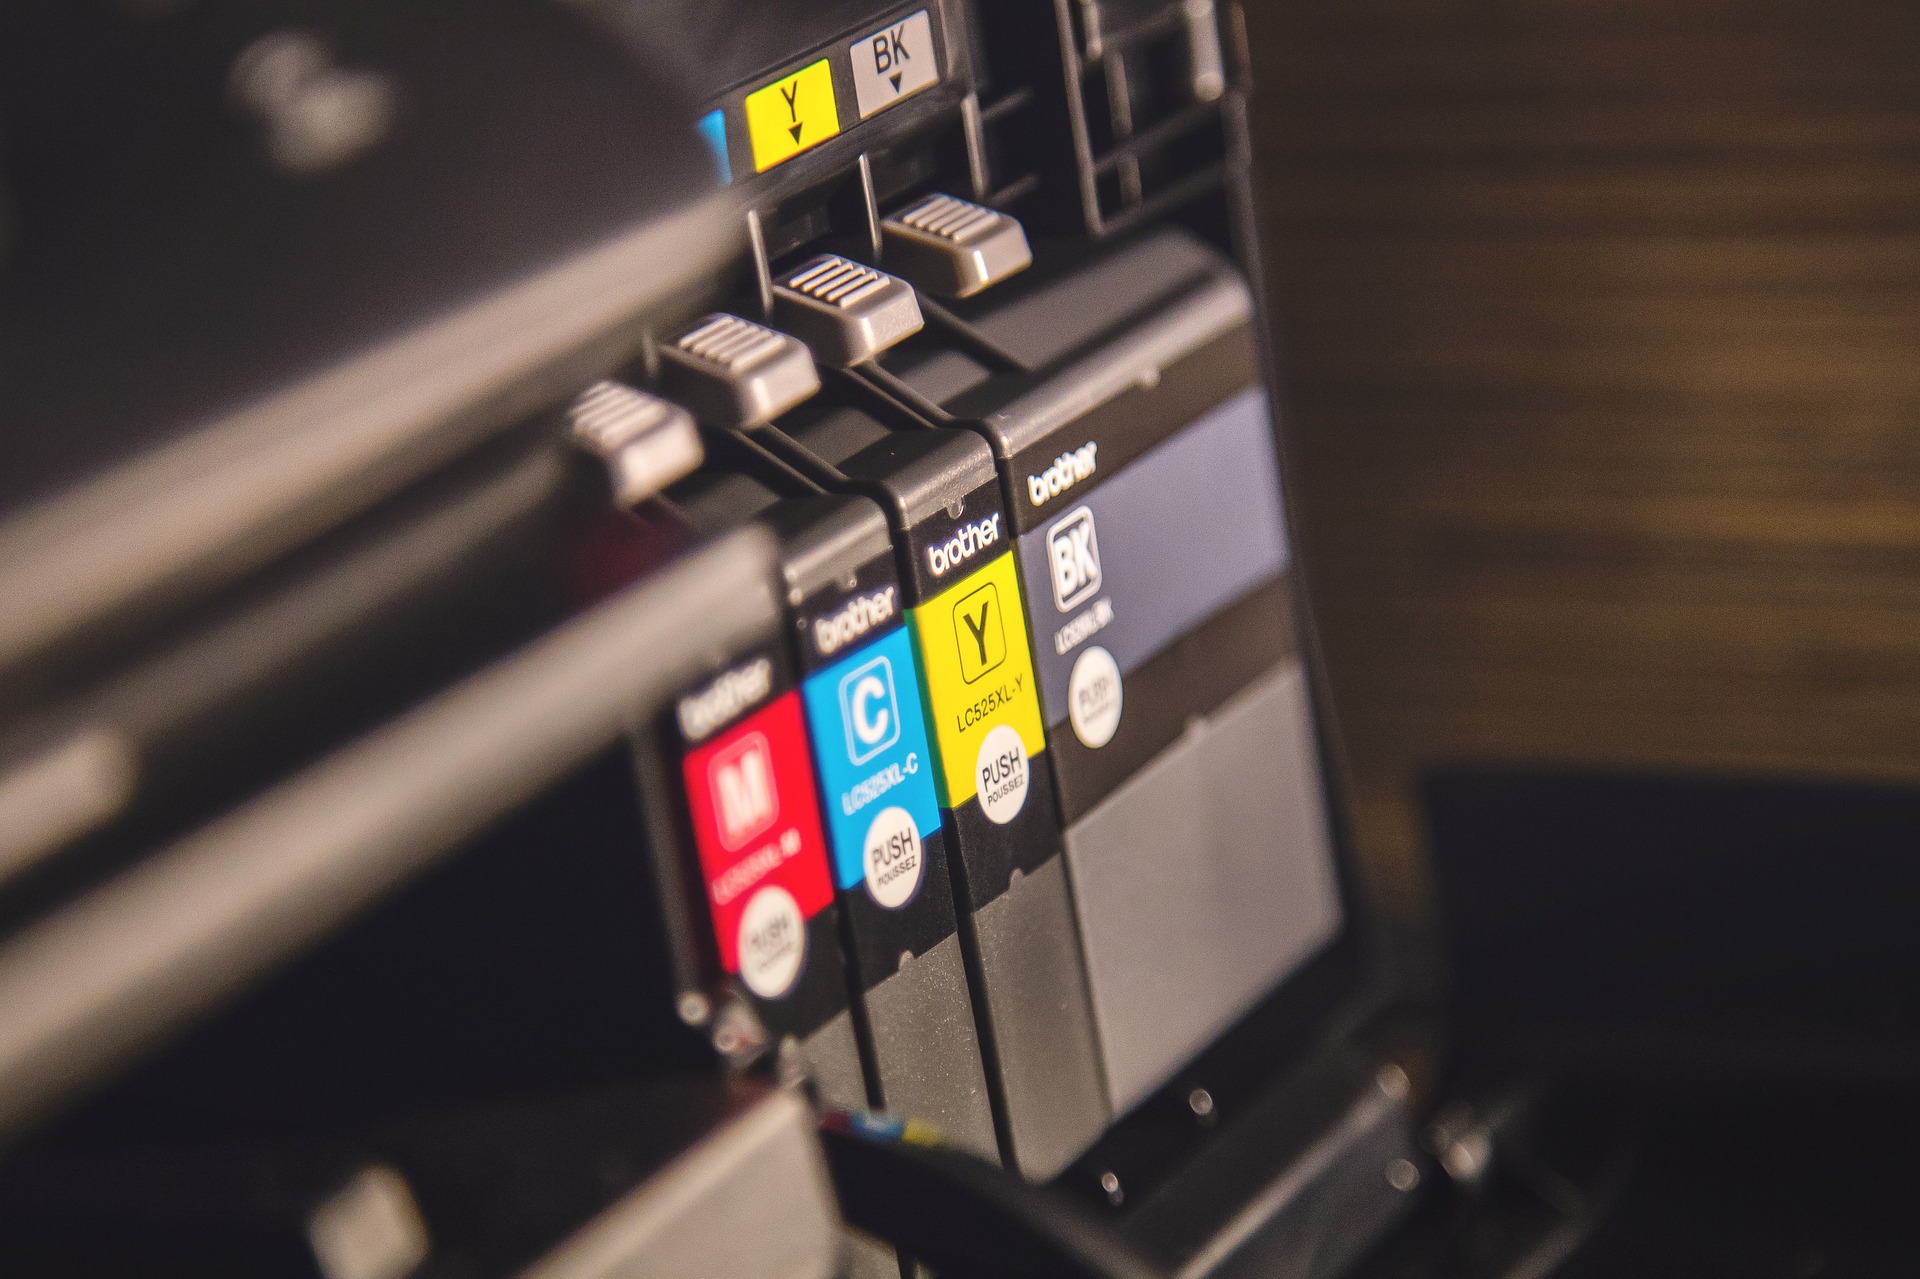 Used Toner Cartridges: Doing the Right Thing